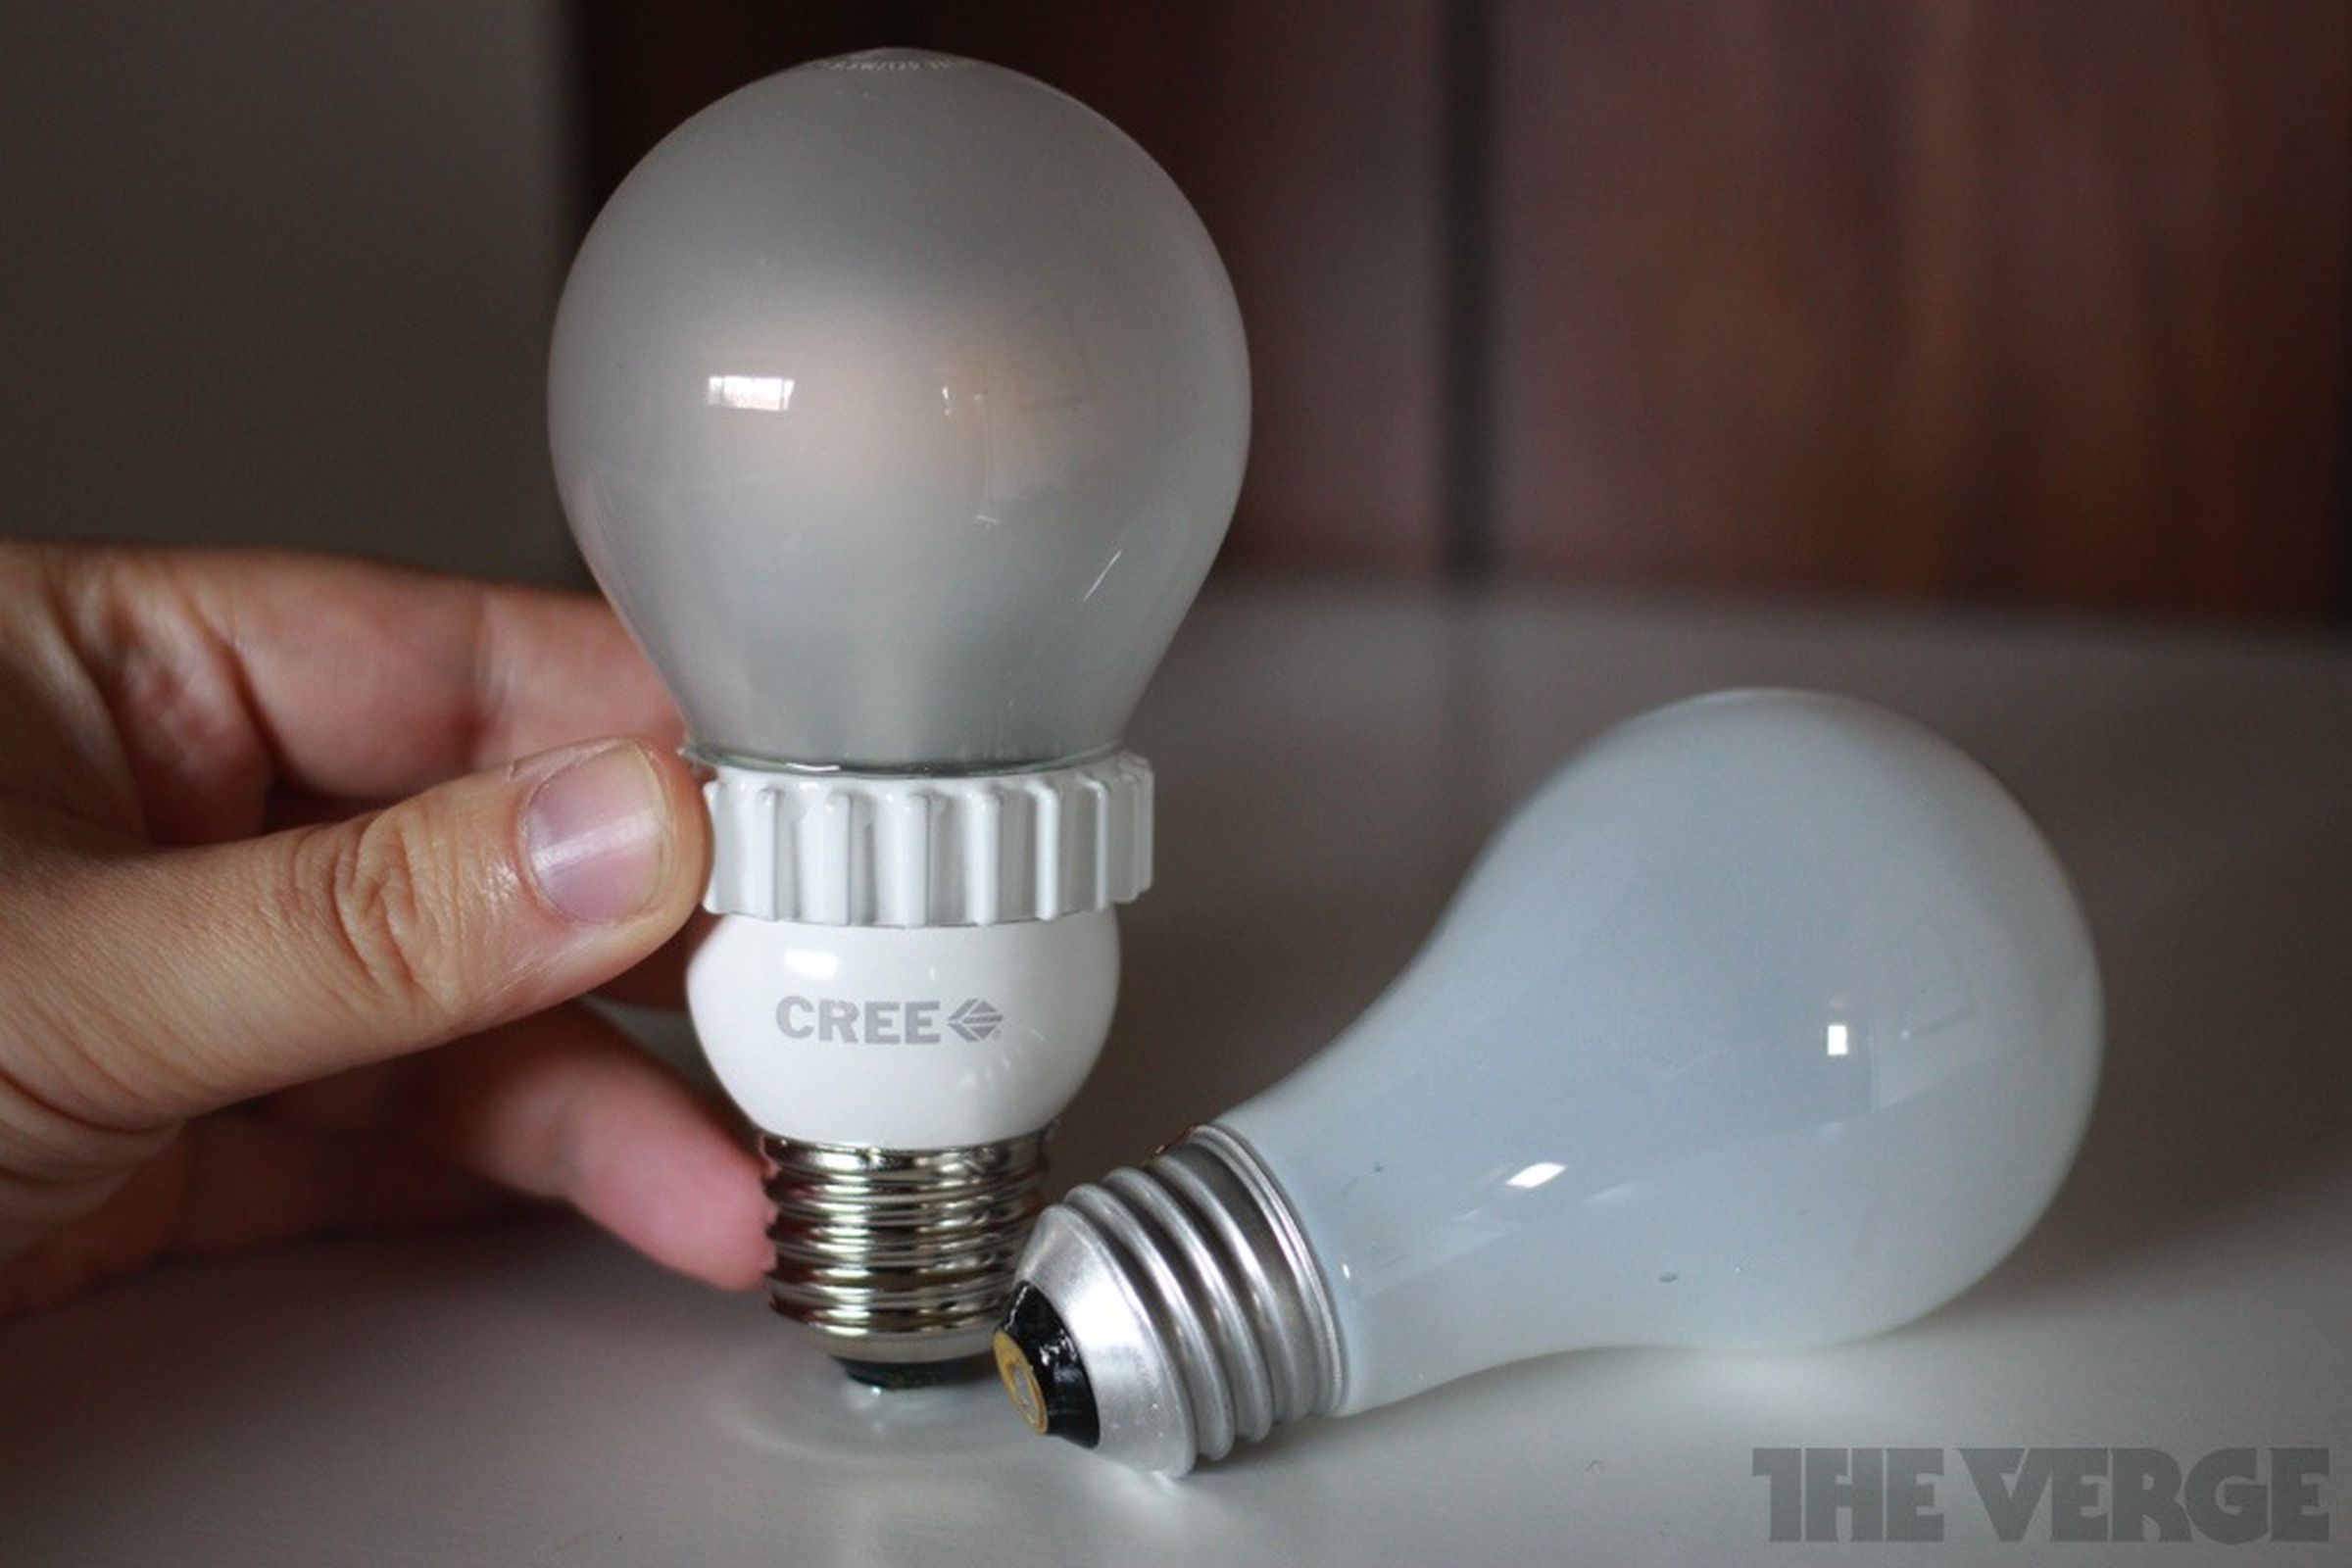 Gallery Photo: Cree LED light bulb hands-on pictures